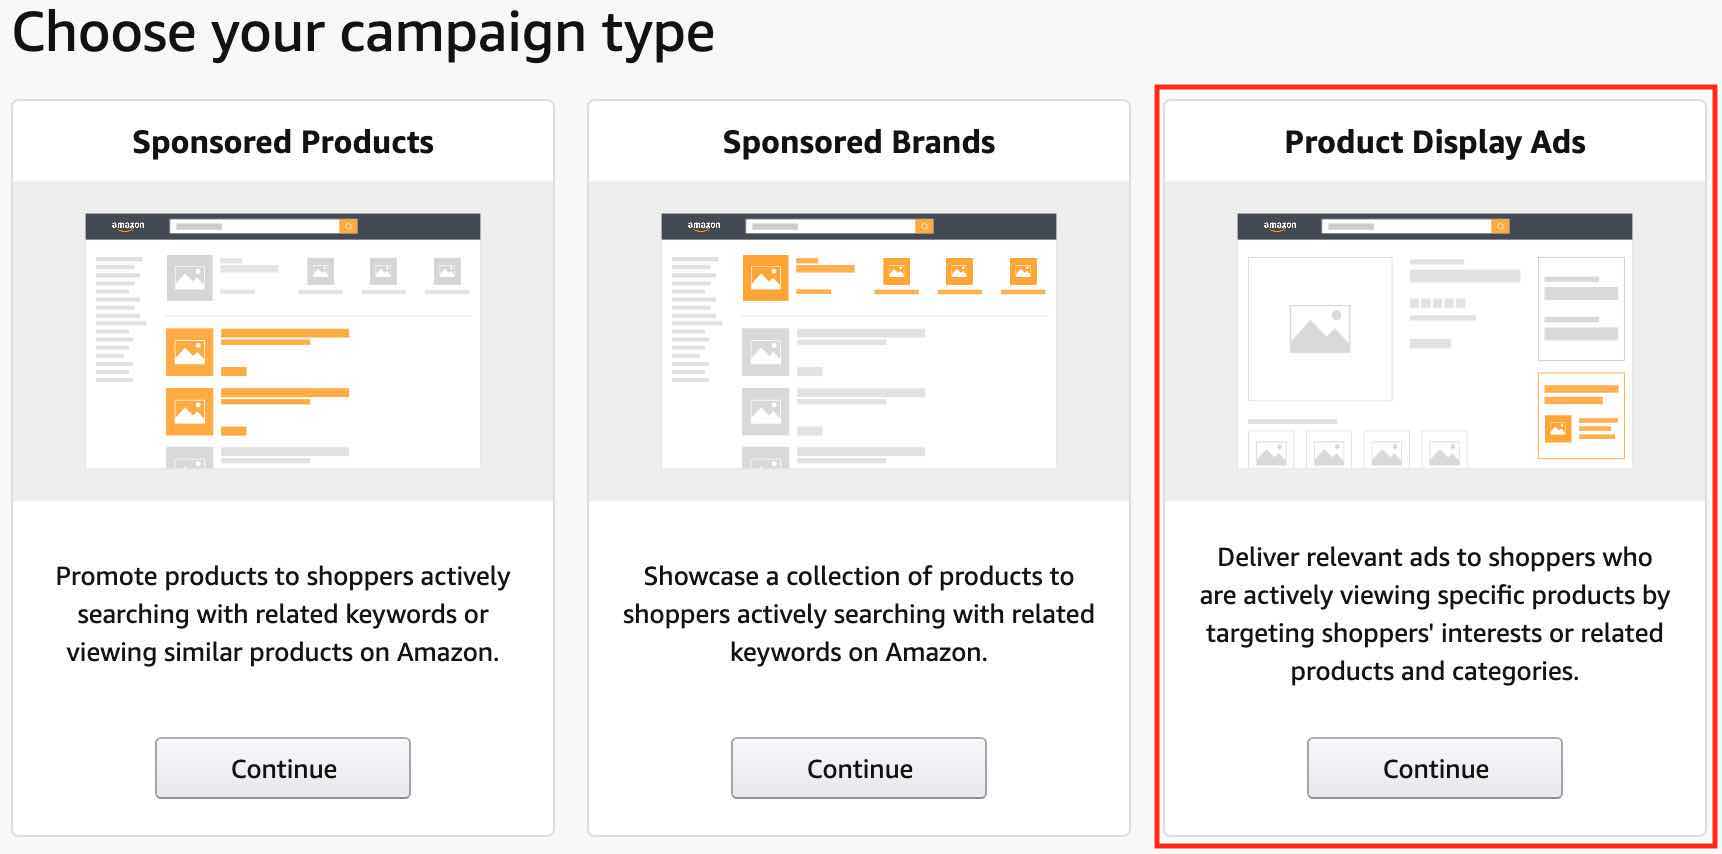 What Are Display Ads? A Step-by-Step Guide